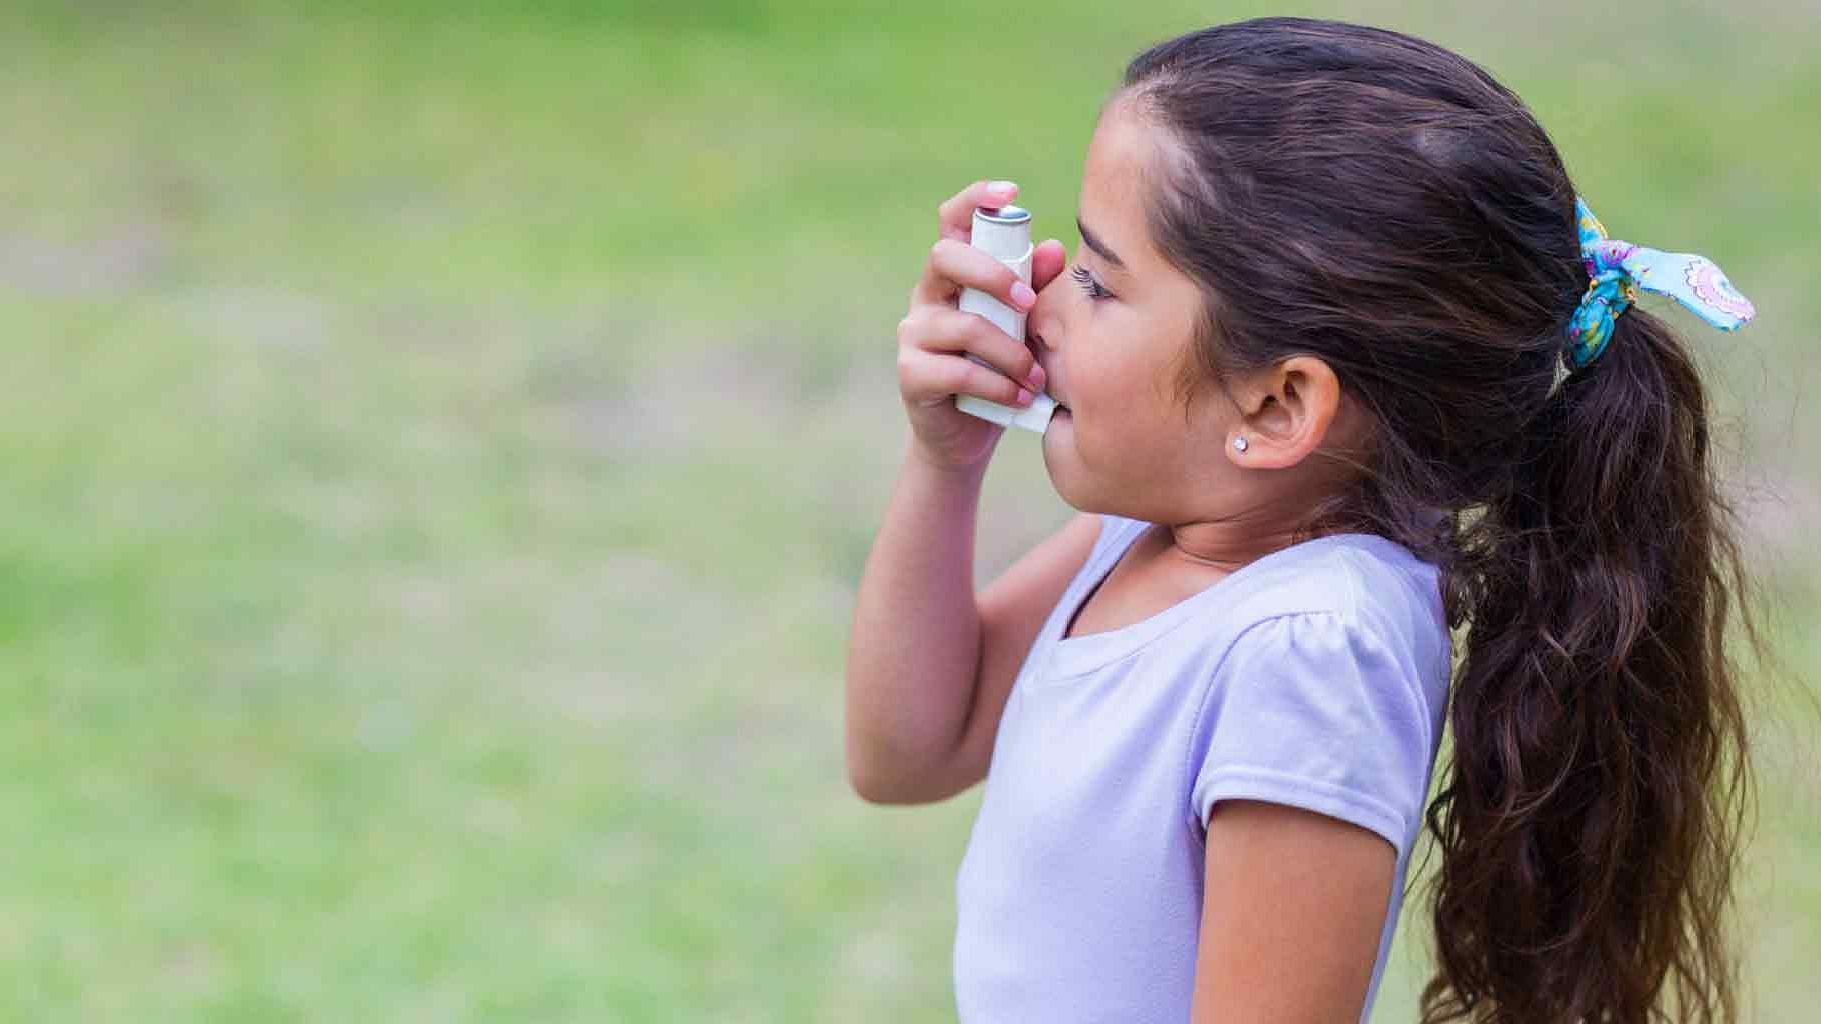 Take the quiz and know more about Asthma.